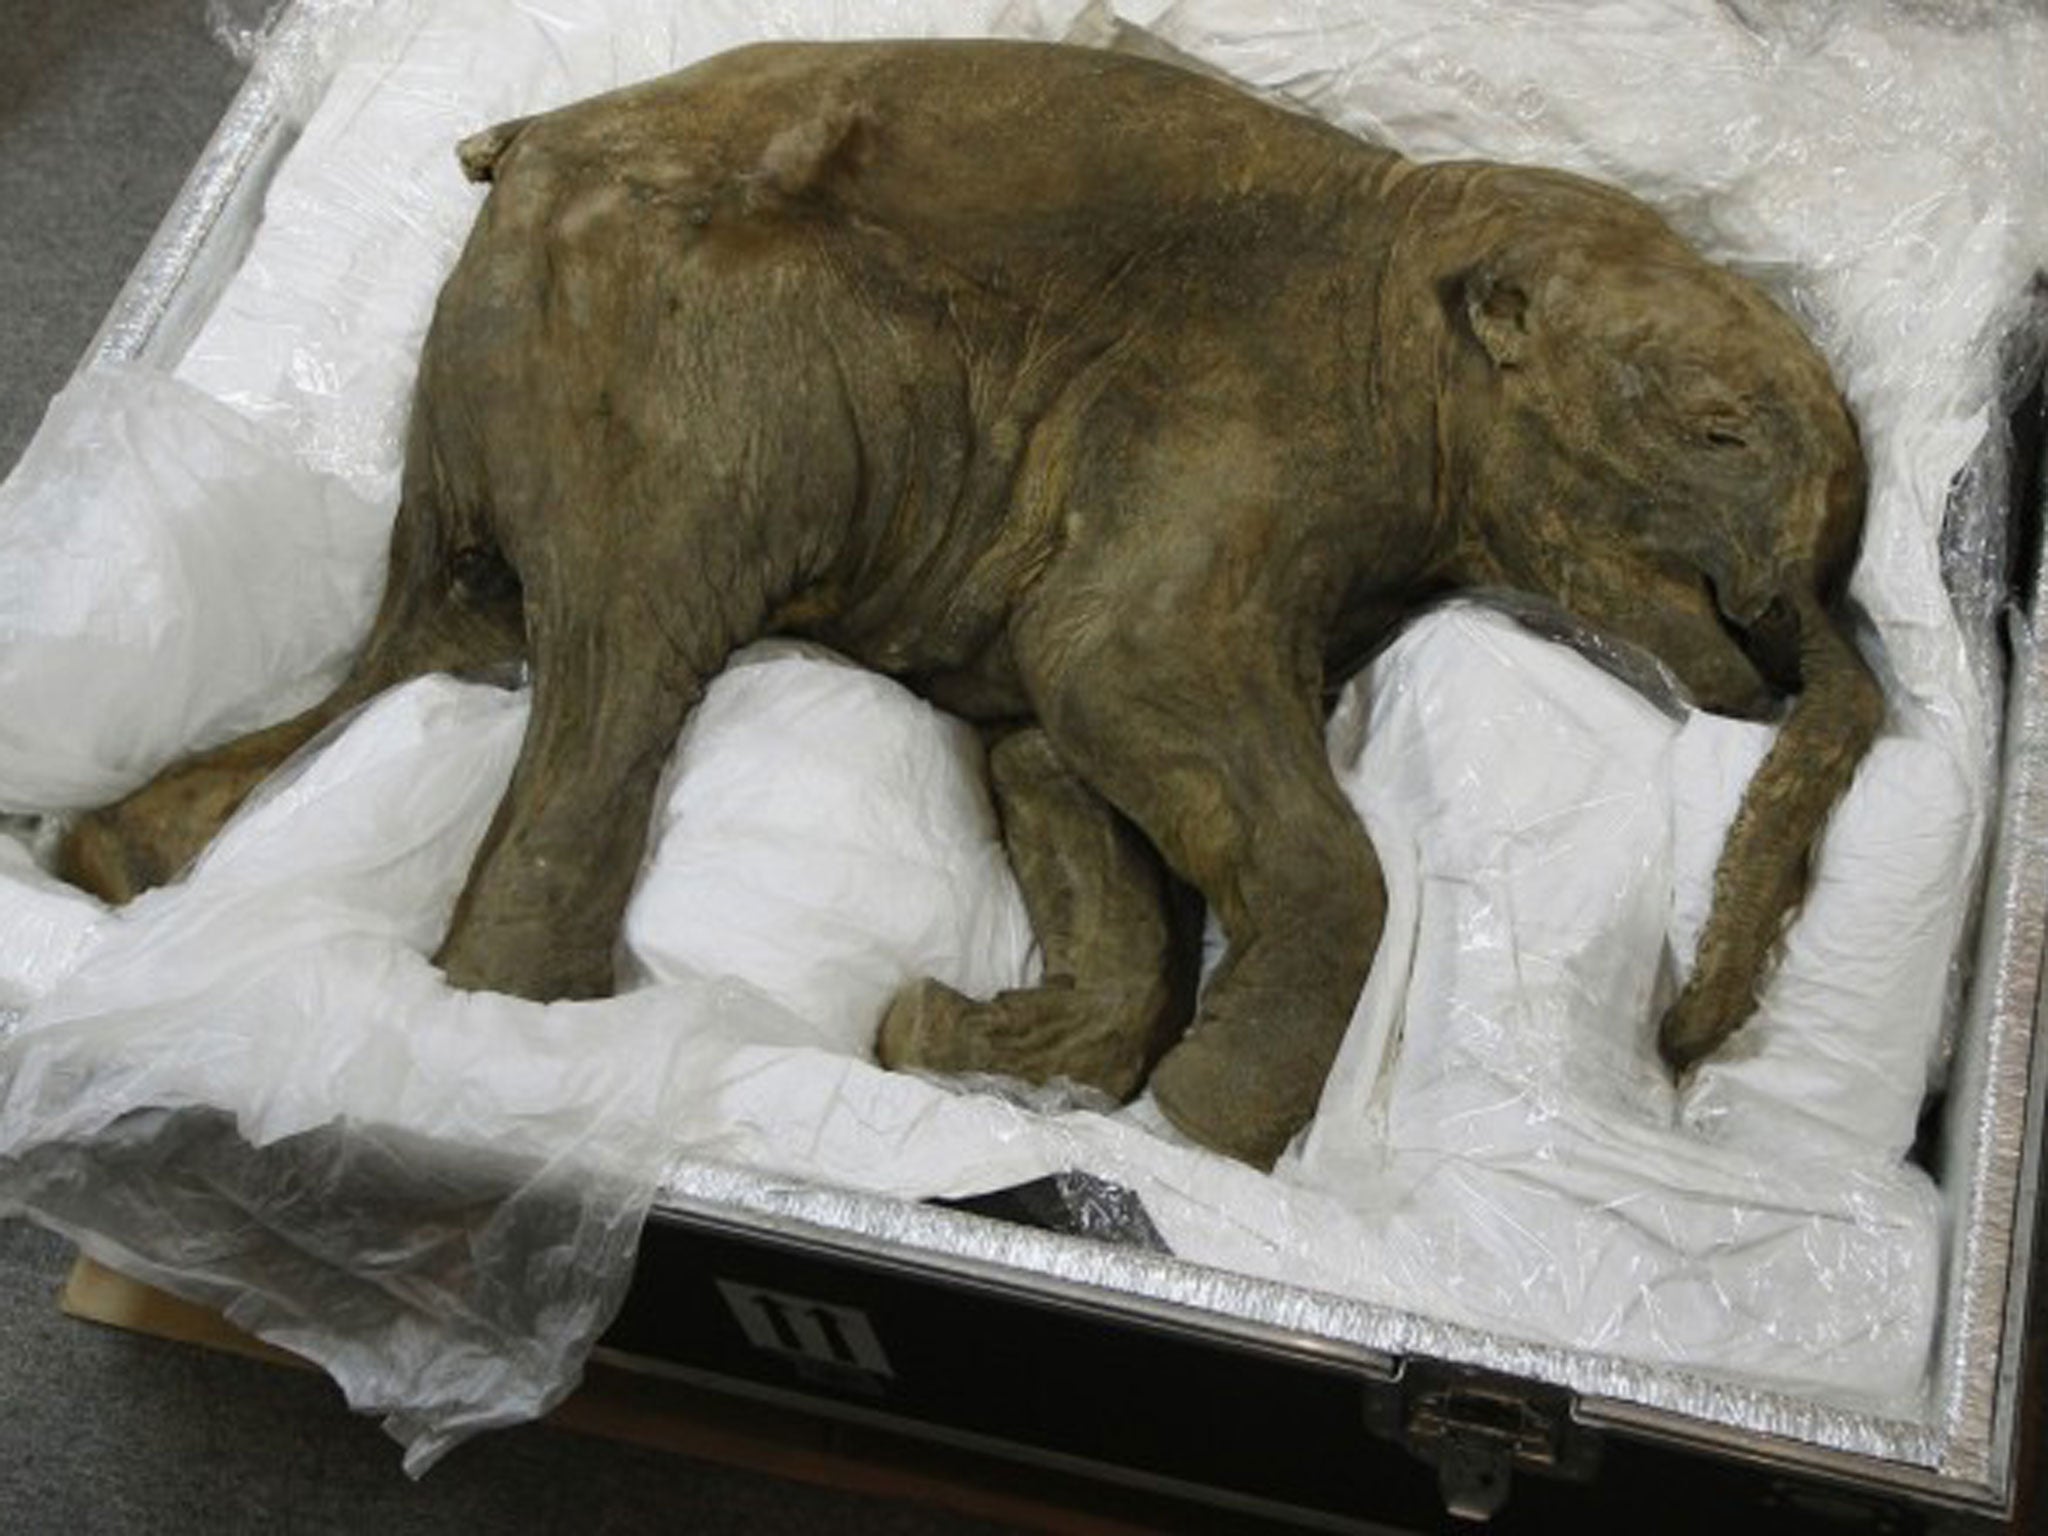 The baby mammoth, found in Siberia by a reindeer herder in 2007, is little larger than a dog, and has been nicknamed Lyuba.